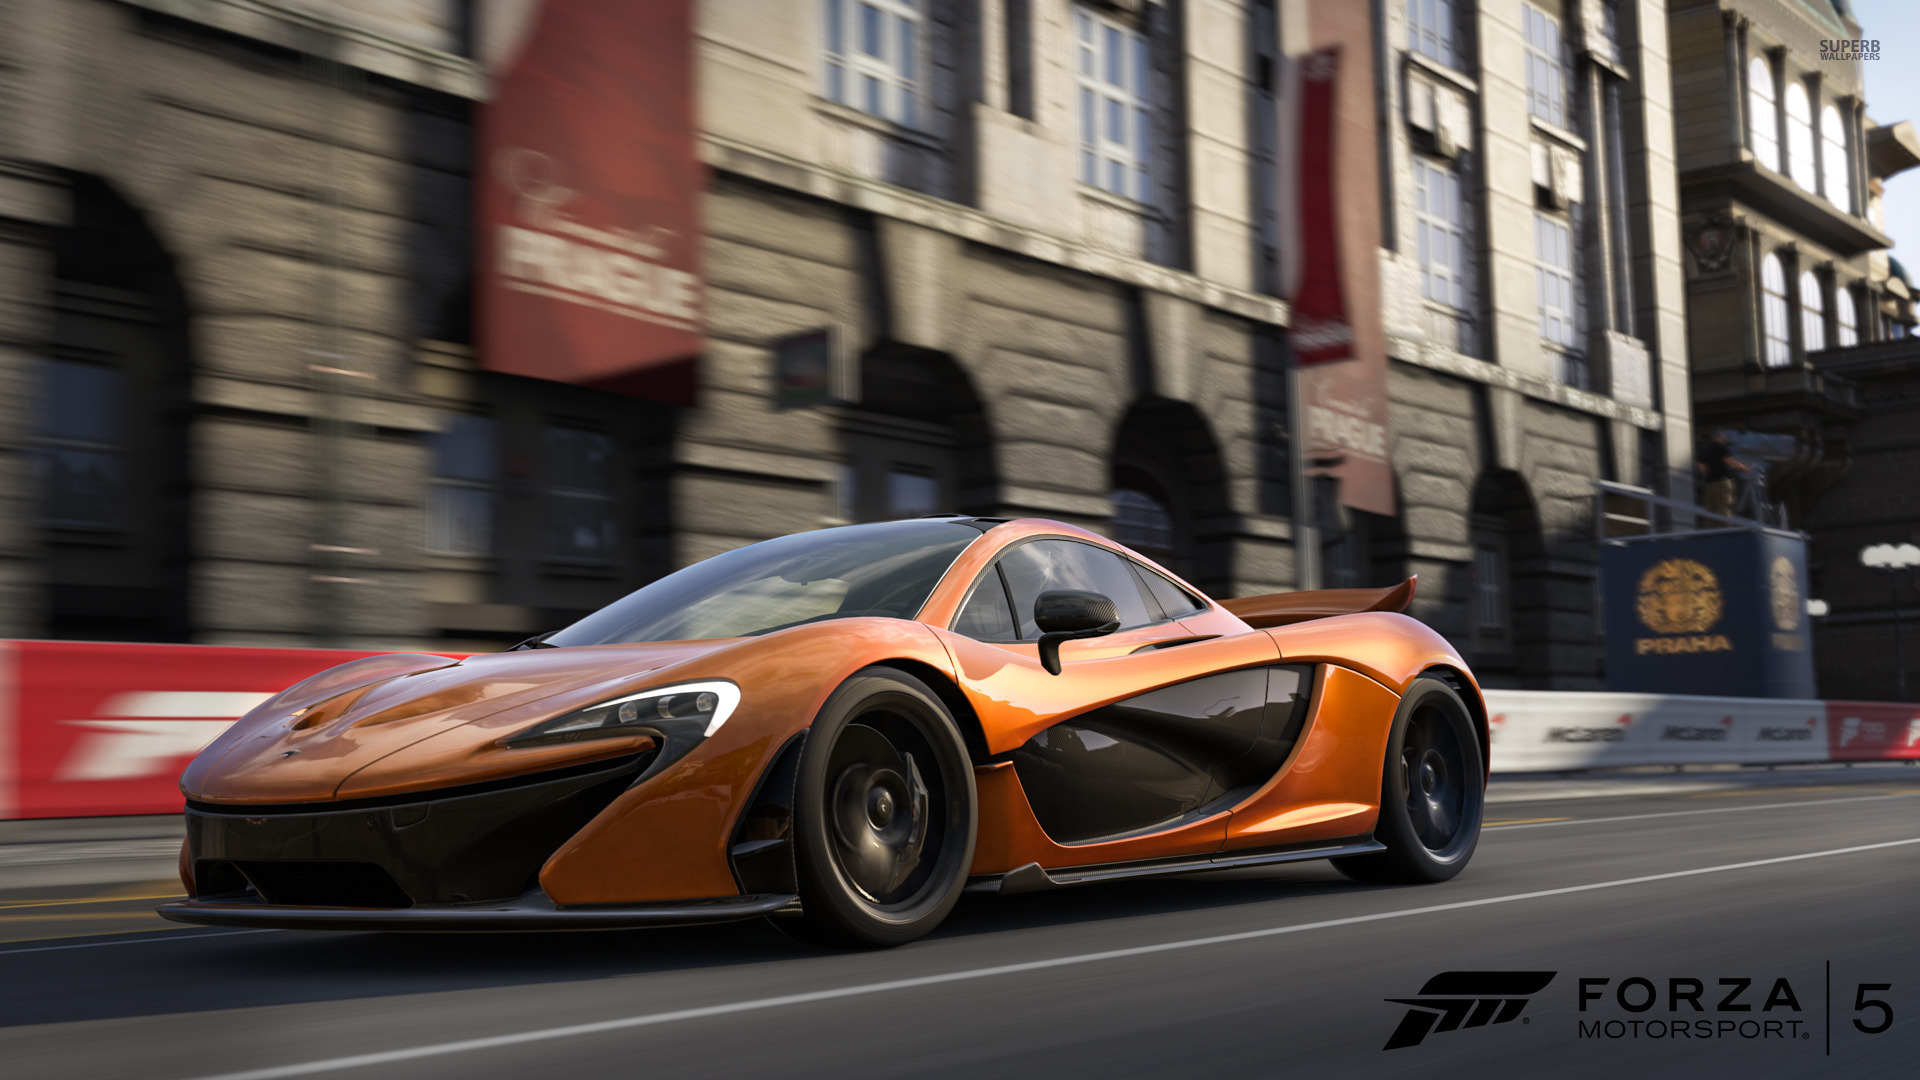 Forza Motorsport 5 wallpapers, Video Game, HQ Forza Motorsport 5 pictures |  4K Wallpapers 2019